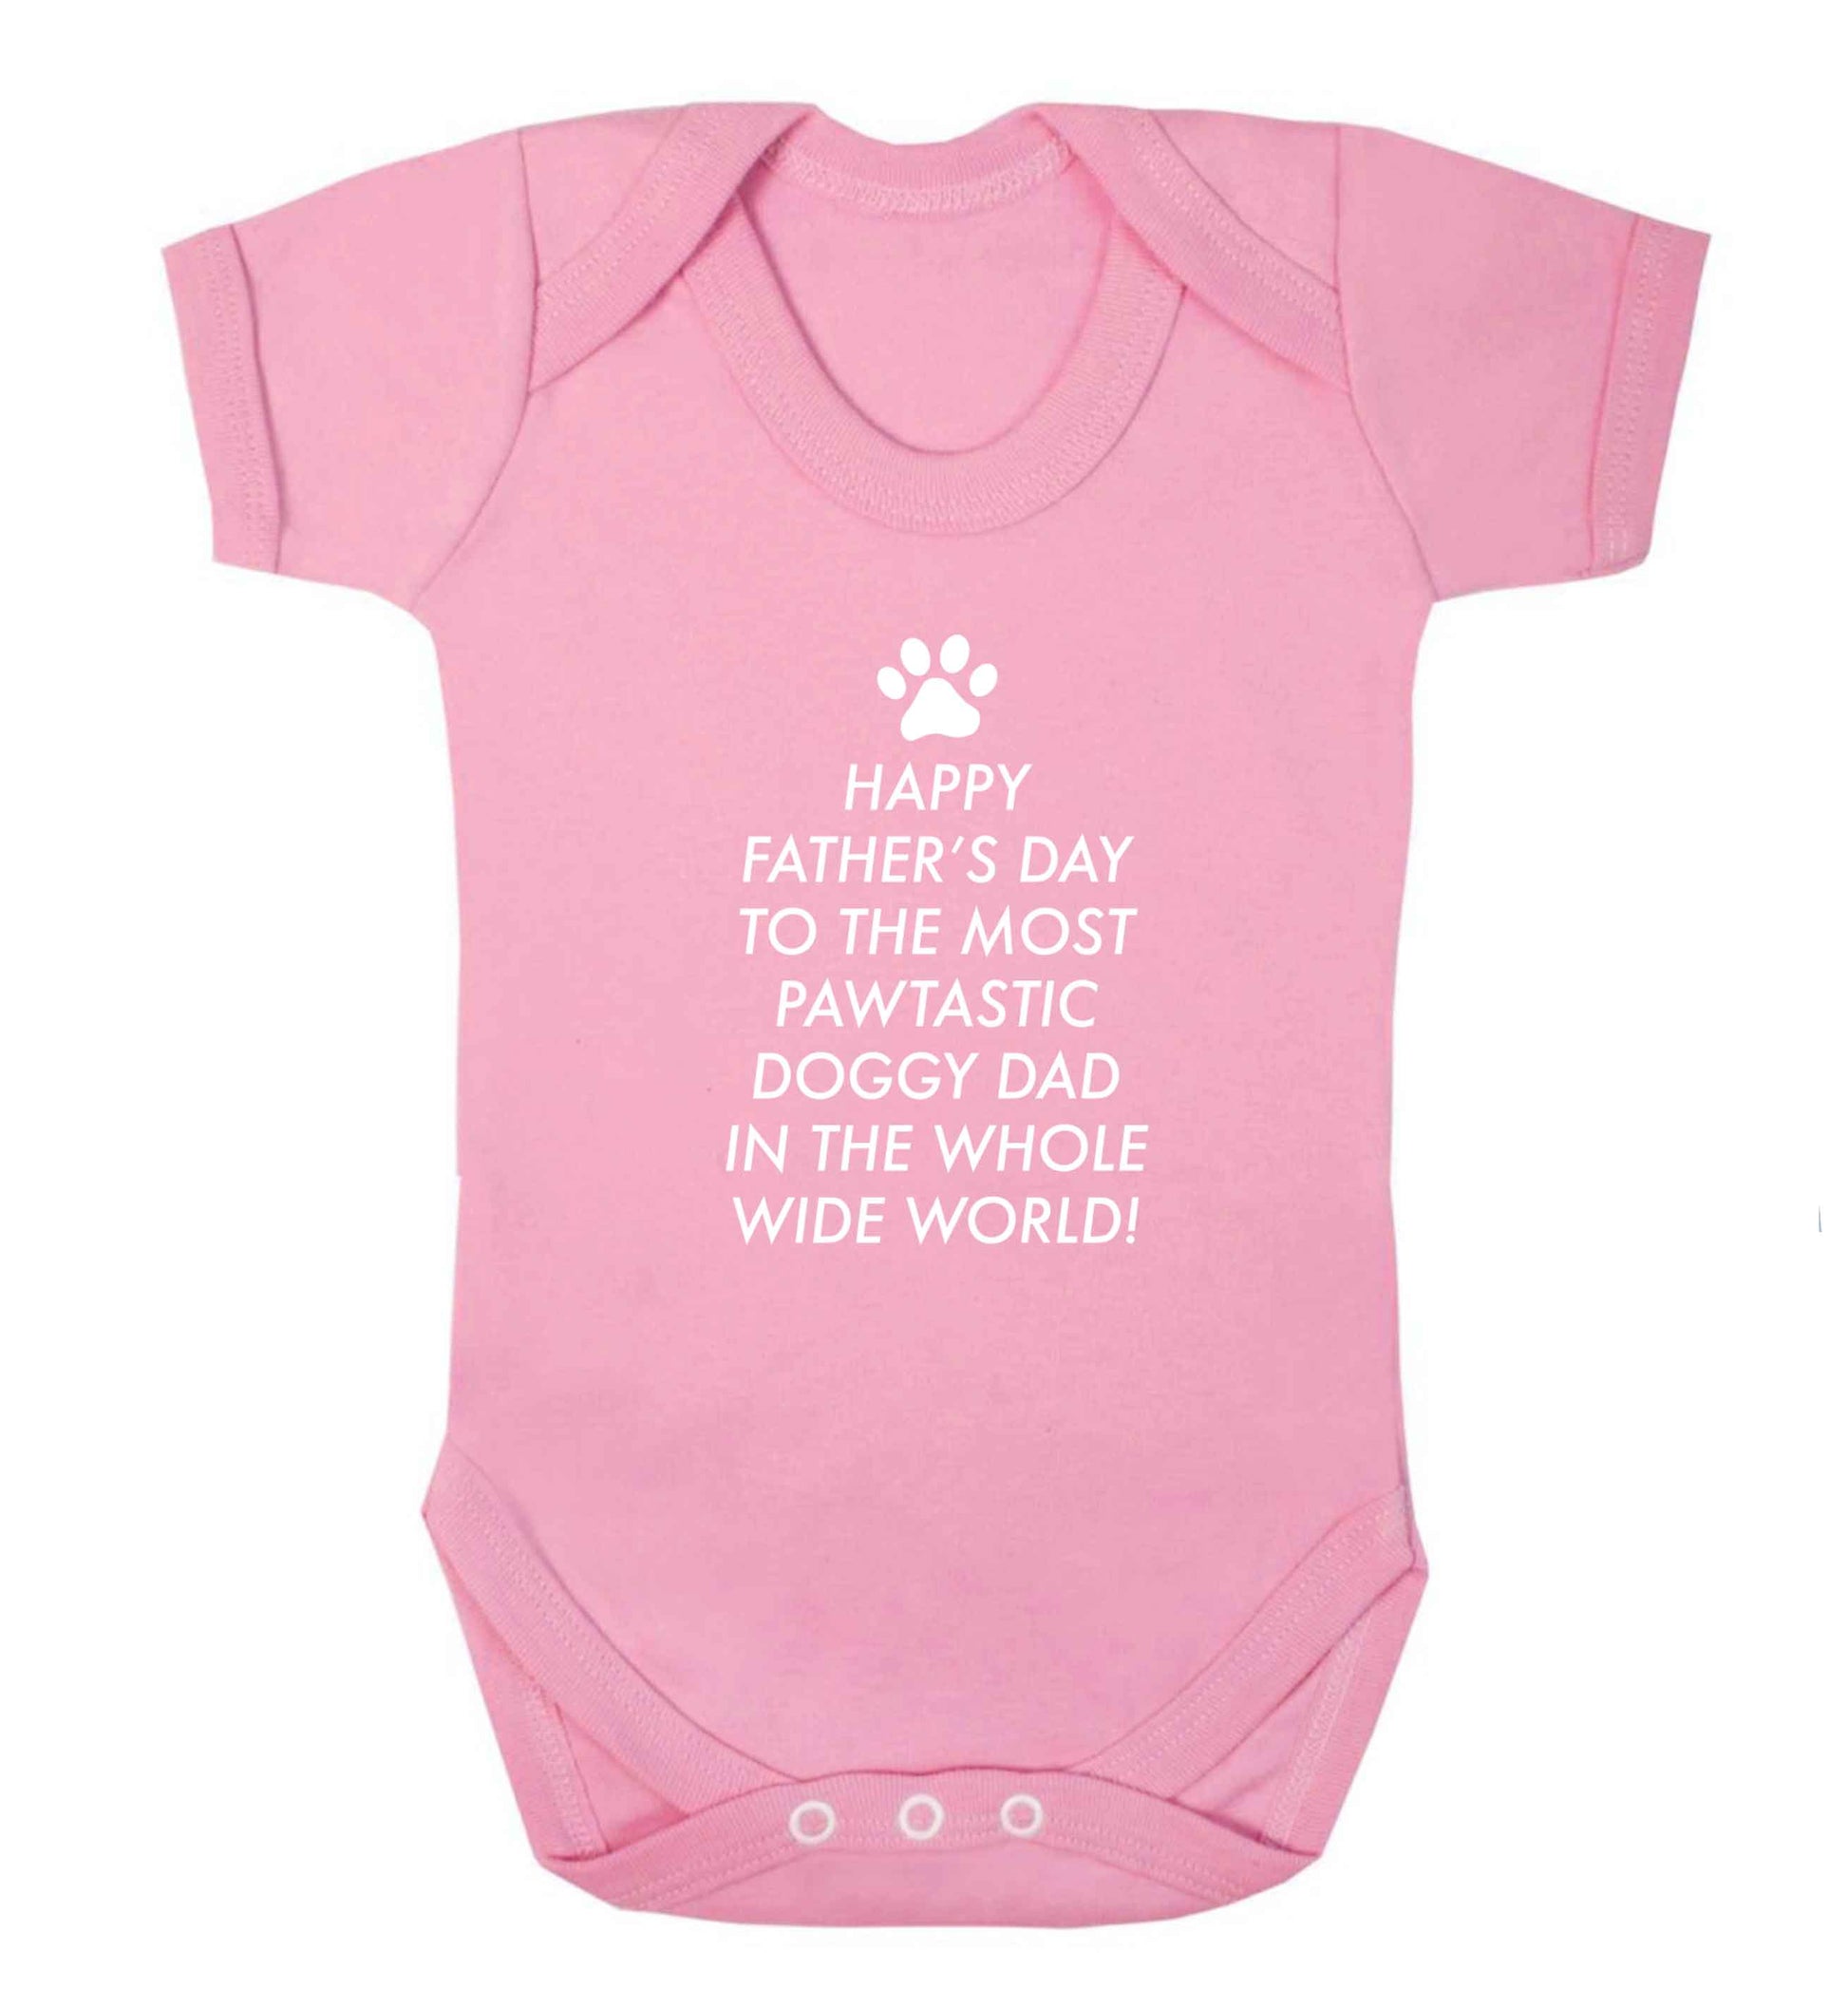 Happy Father's day to the most pawtastic doggy dad in the whole wide world!baby vest pale pink 18-24 months